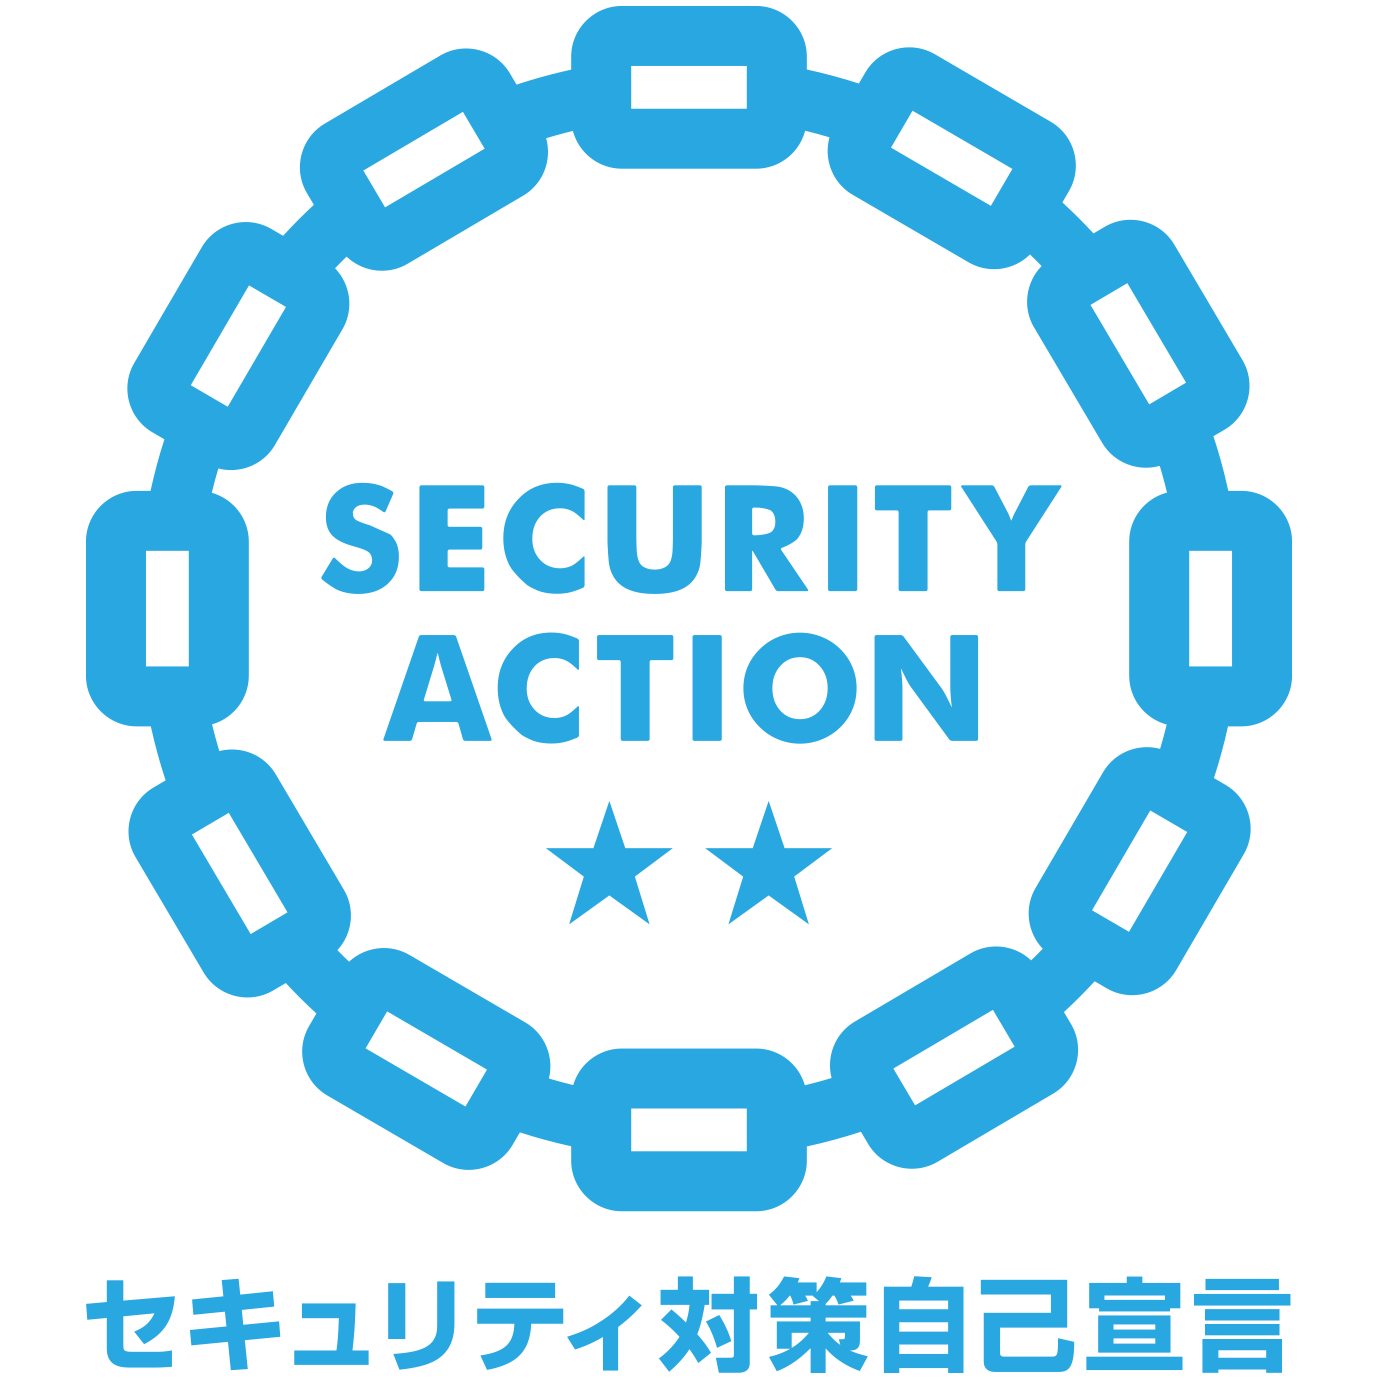 SECURITY ACTION(二つ星★★)